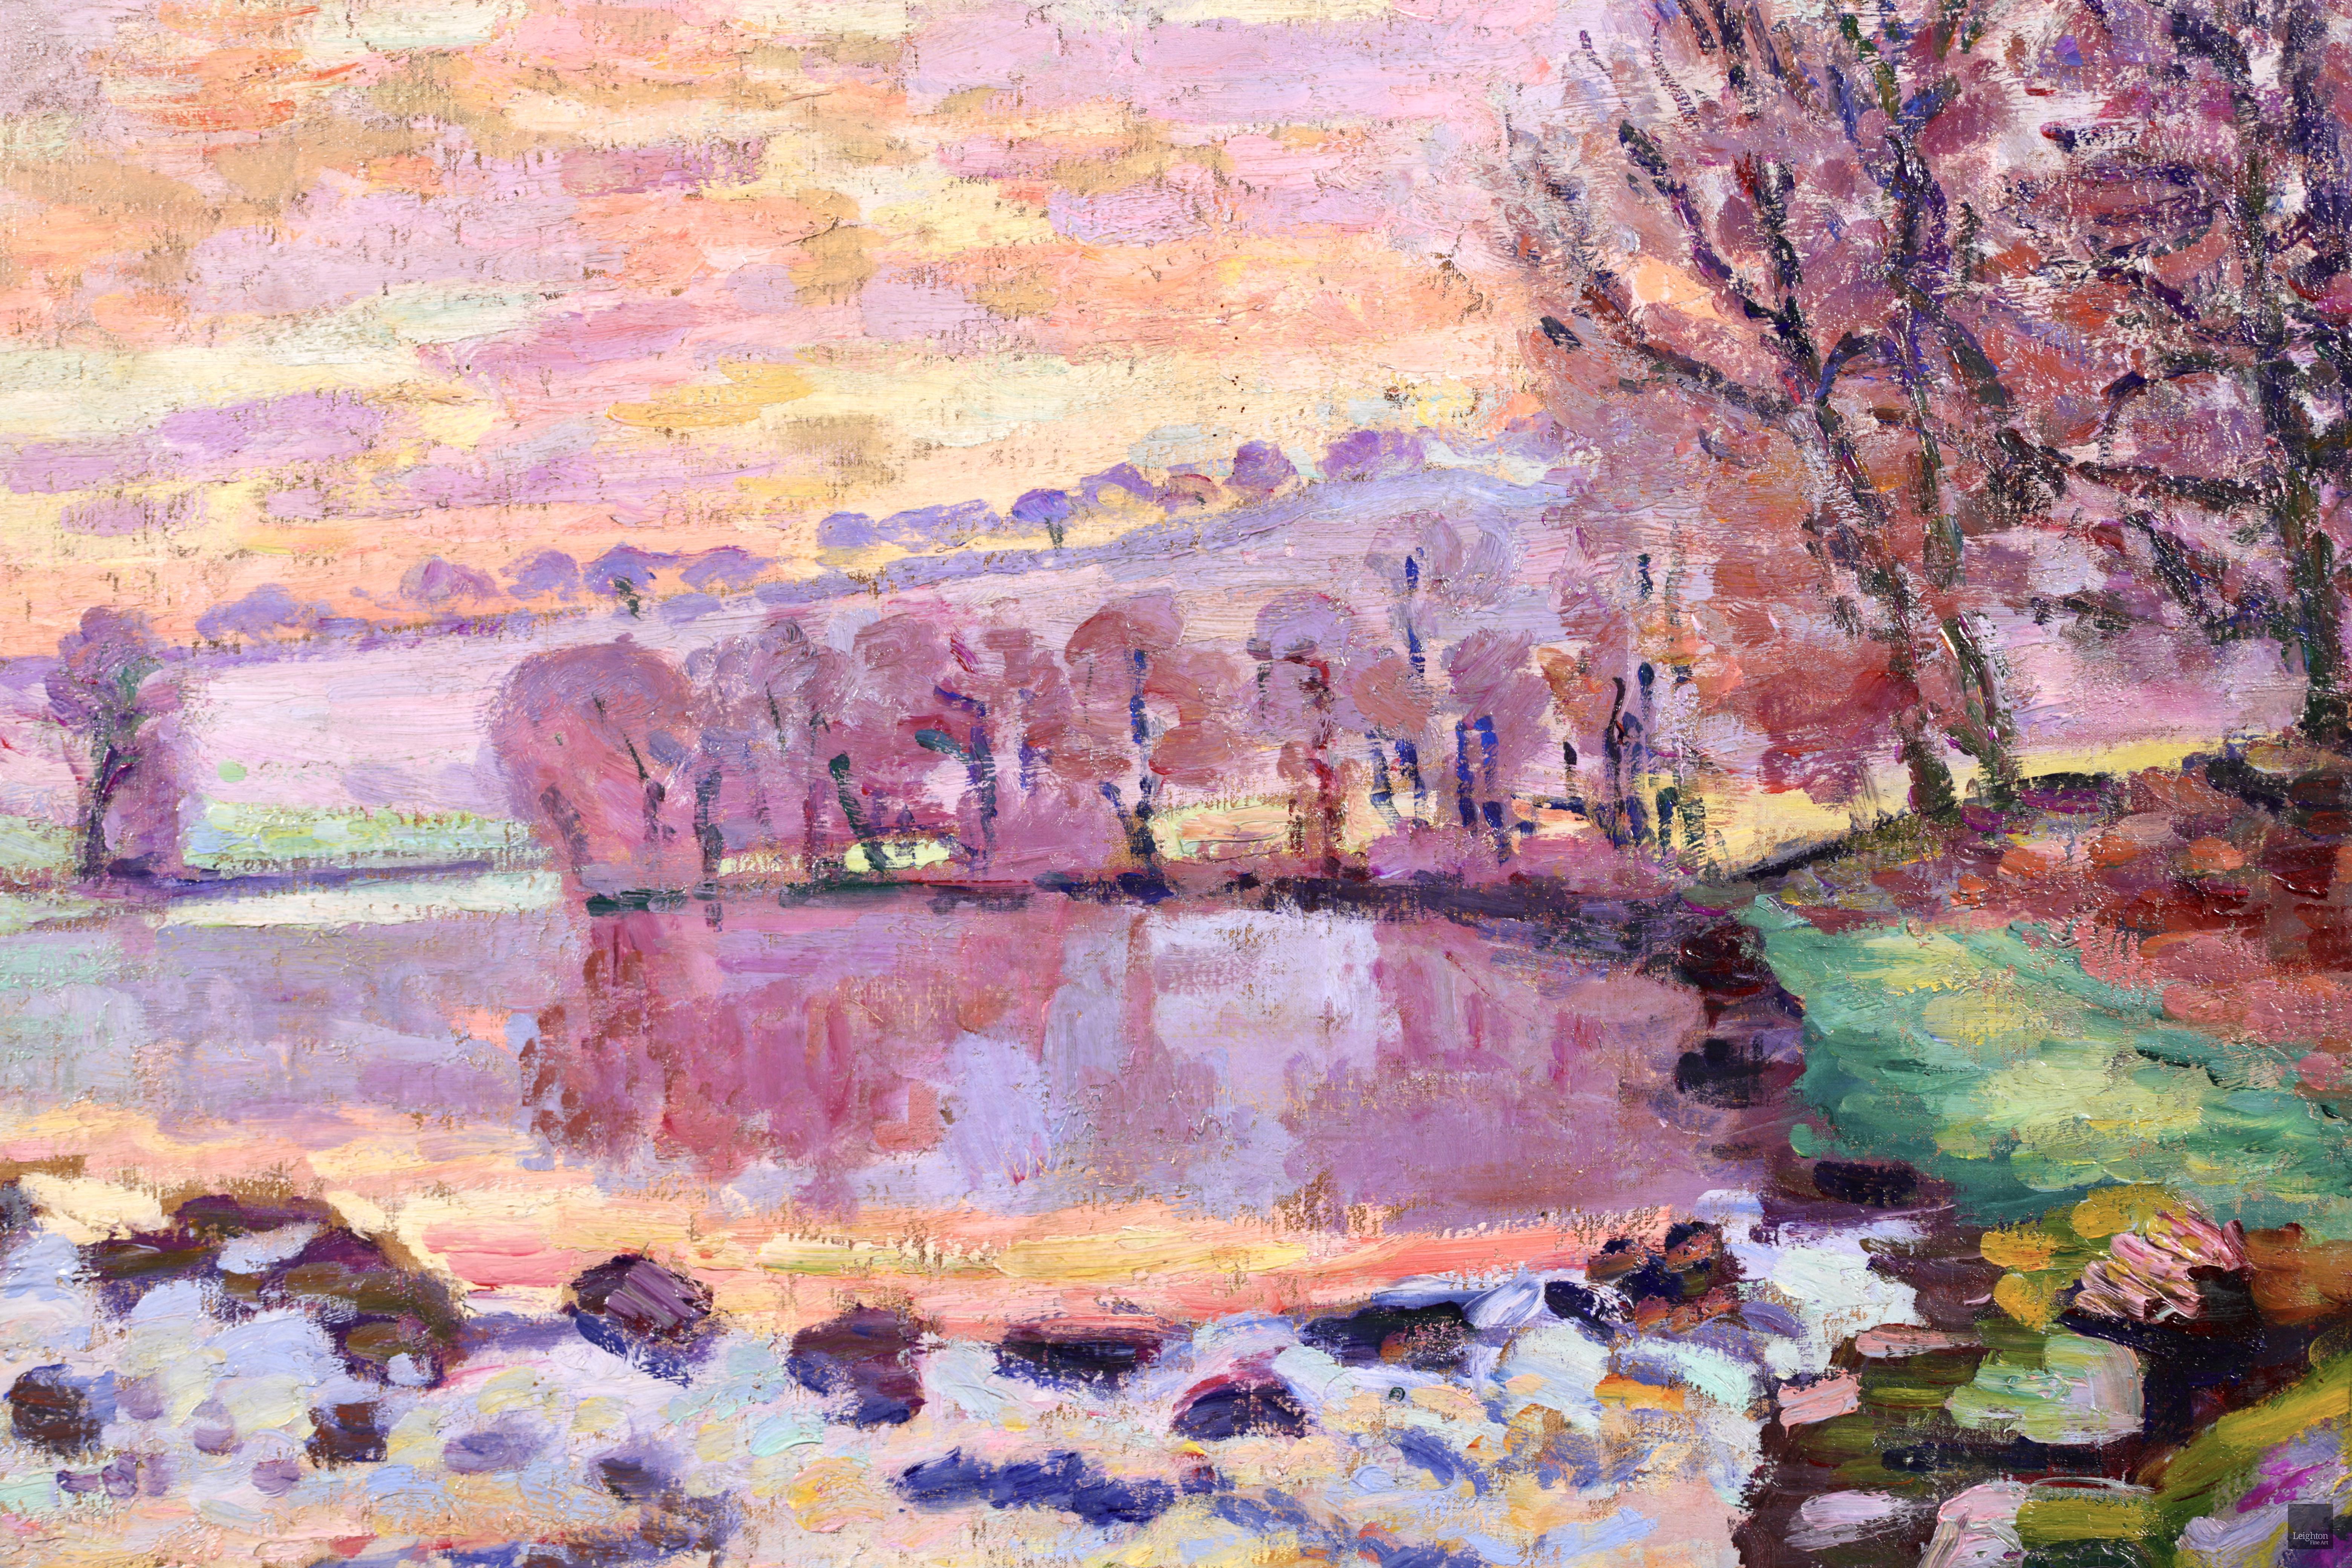 Signed and dated impressionist landscape oil on canvas by French painter Jean Baptiste Armand Guillaumin. This simply stunning piece depicts a view of the dam at Genetin on the River Creuse. This simply stunning winter riverscape depicts a